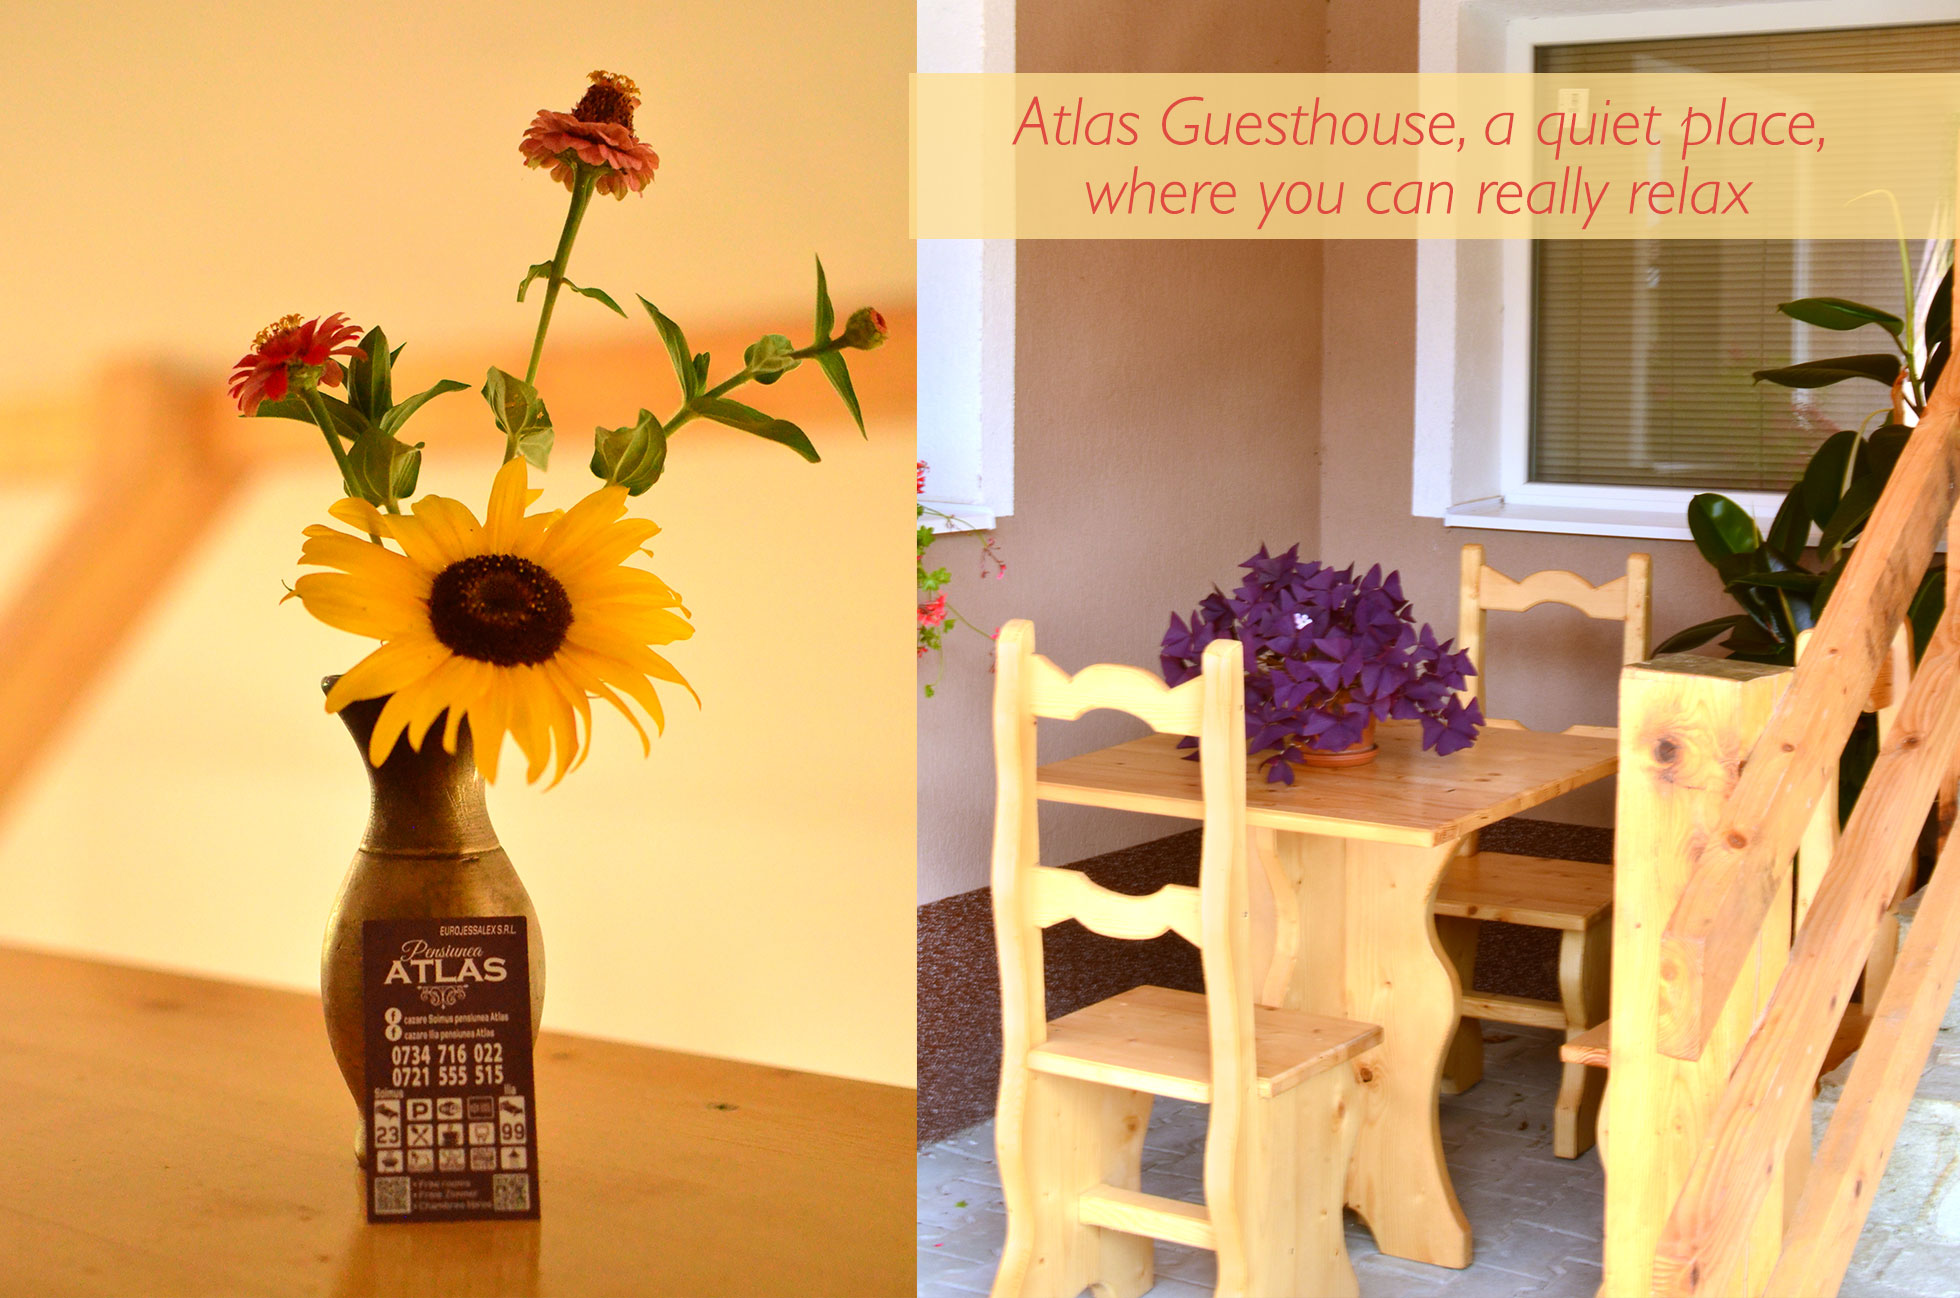 Atlas Guesthouse, a quiet place, where you can really relax